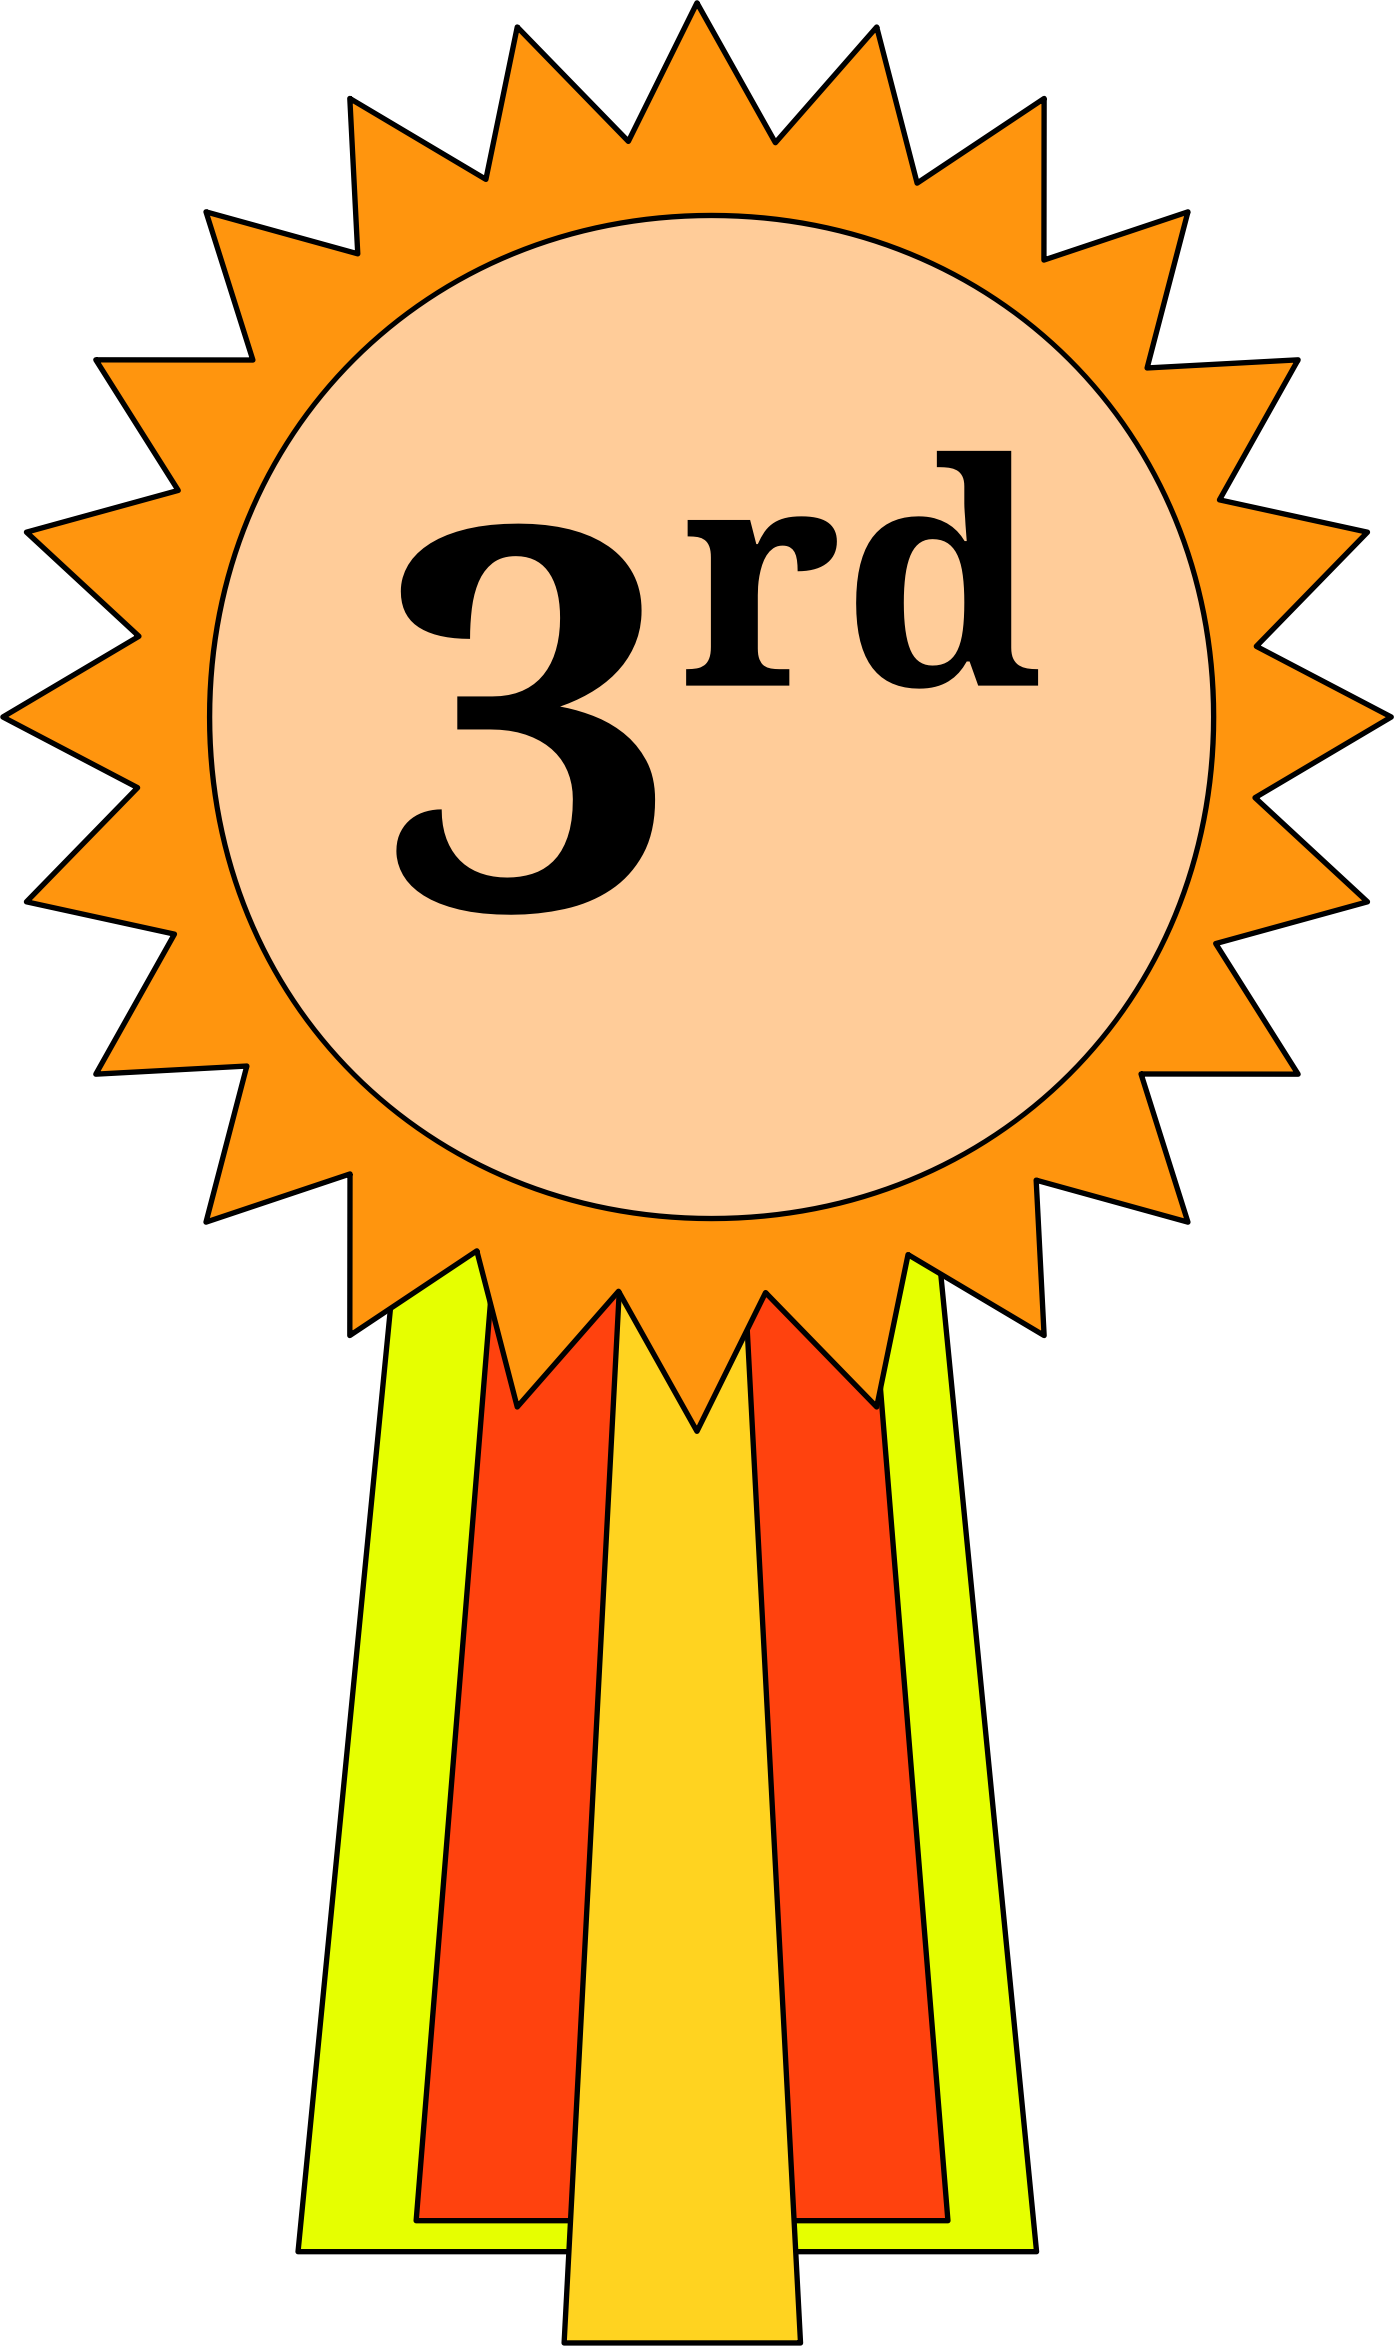 Rd place ribbon. 3 clipart 3rd